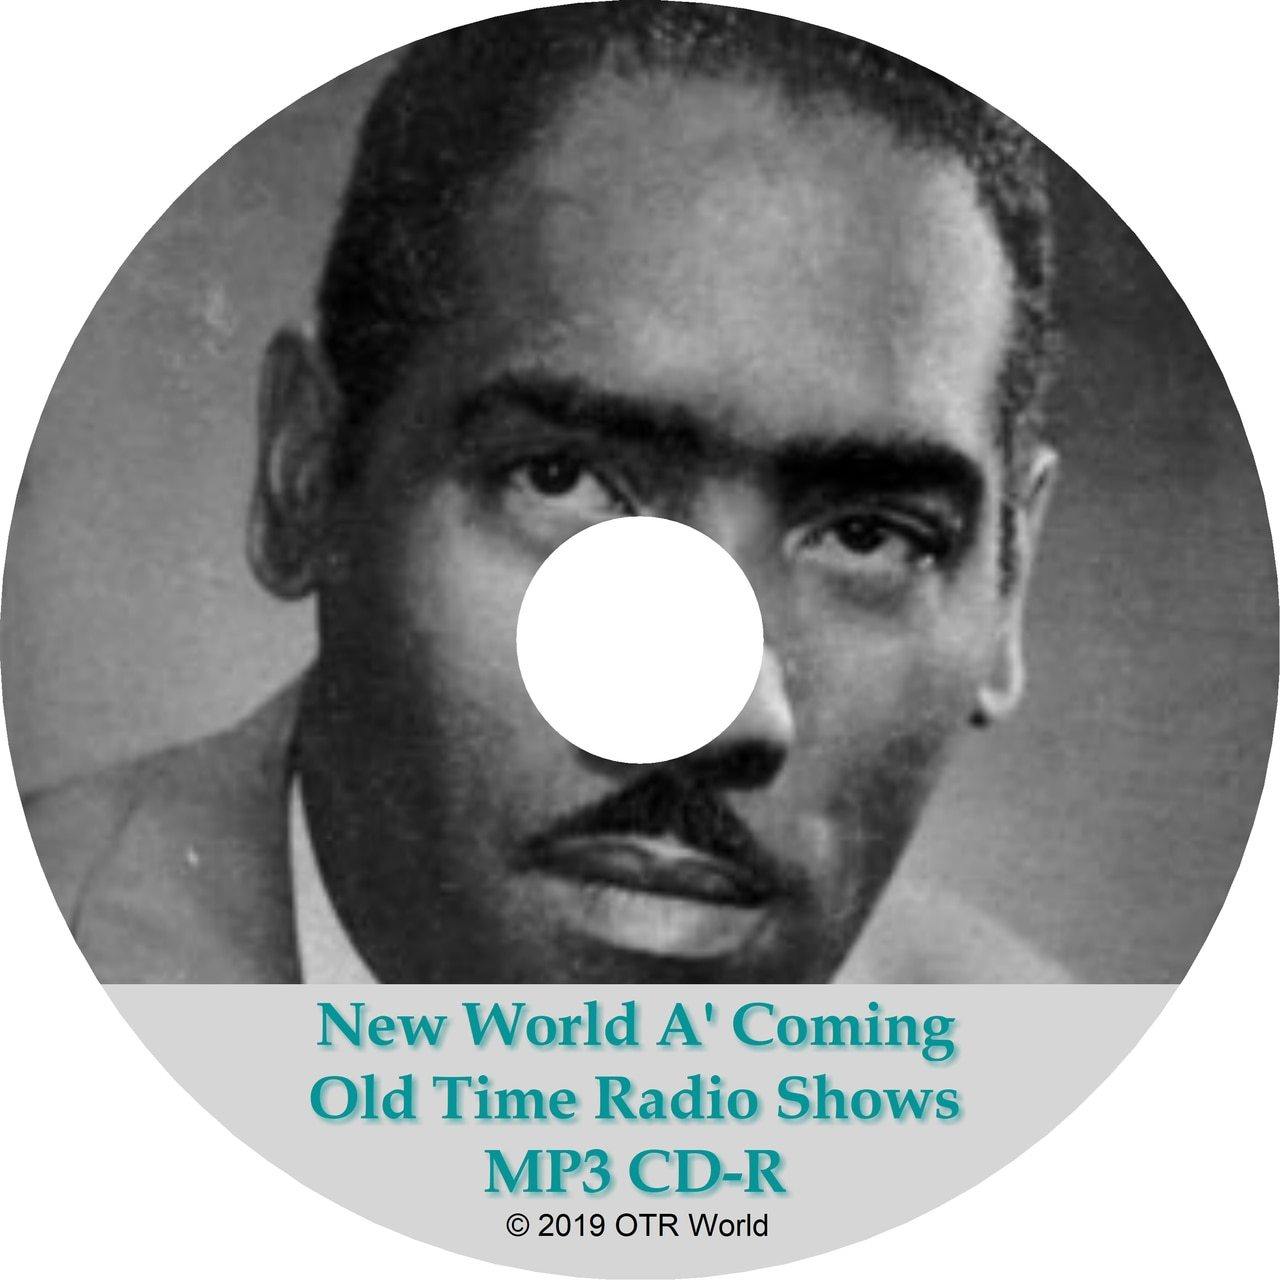 New World A' Coming Old Time Radio Shows OTR 48 Episodes MP3 CD-R - OTR World